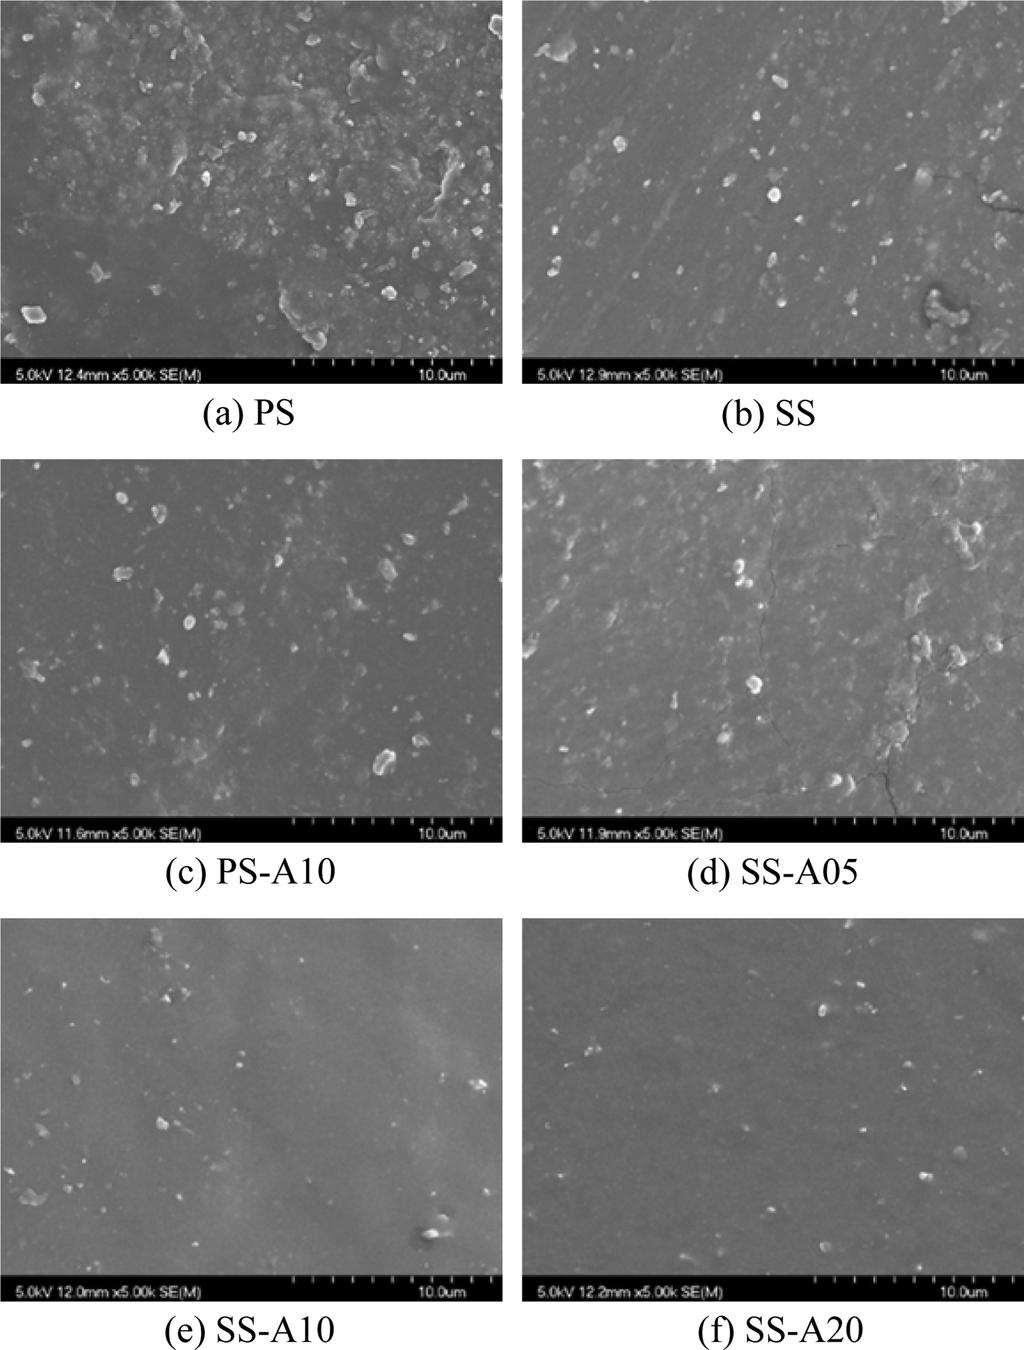 109 Effects of Reactive Compatibilizers on the Morphology and Properties of Natural Rubber/SiO2 Composites 나타남으로써 생성을 확인할 수 있었다.